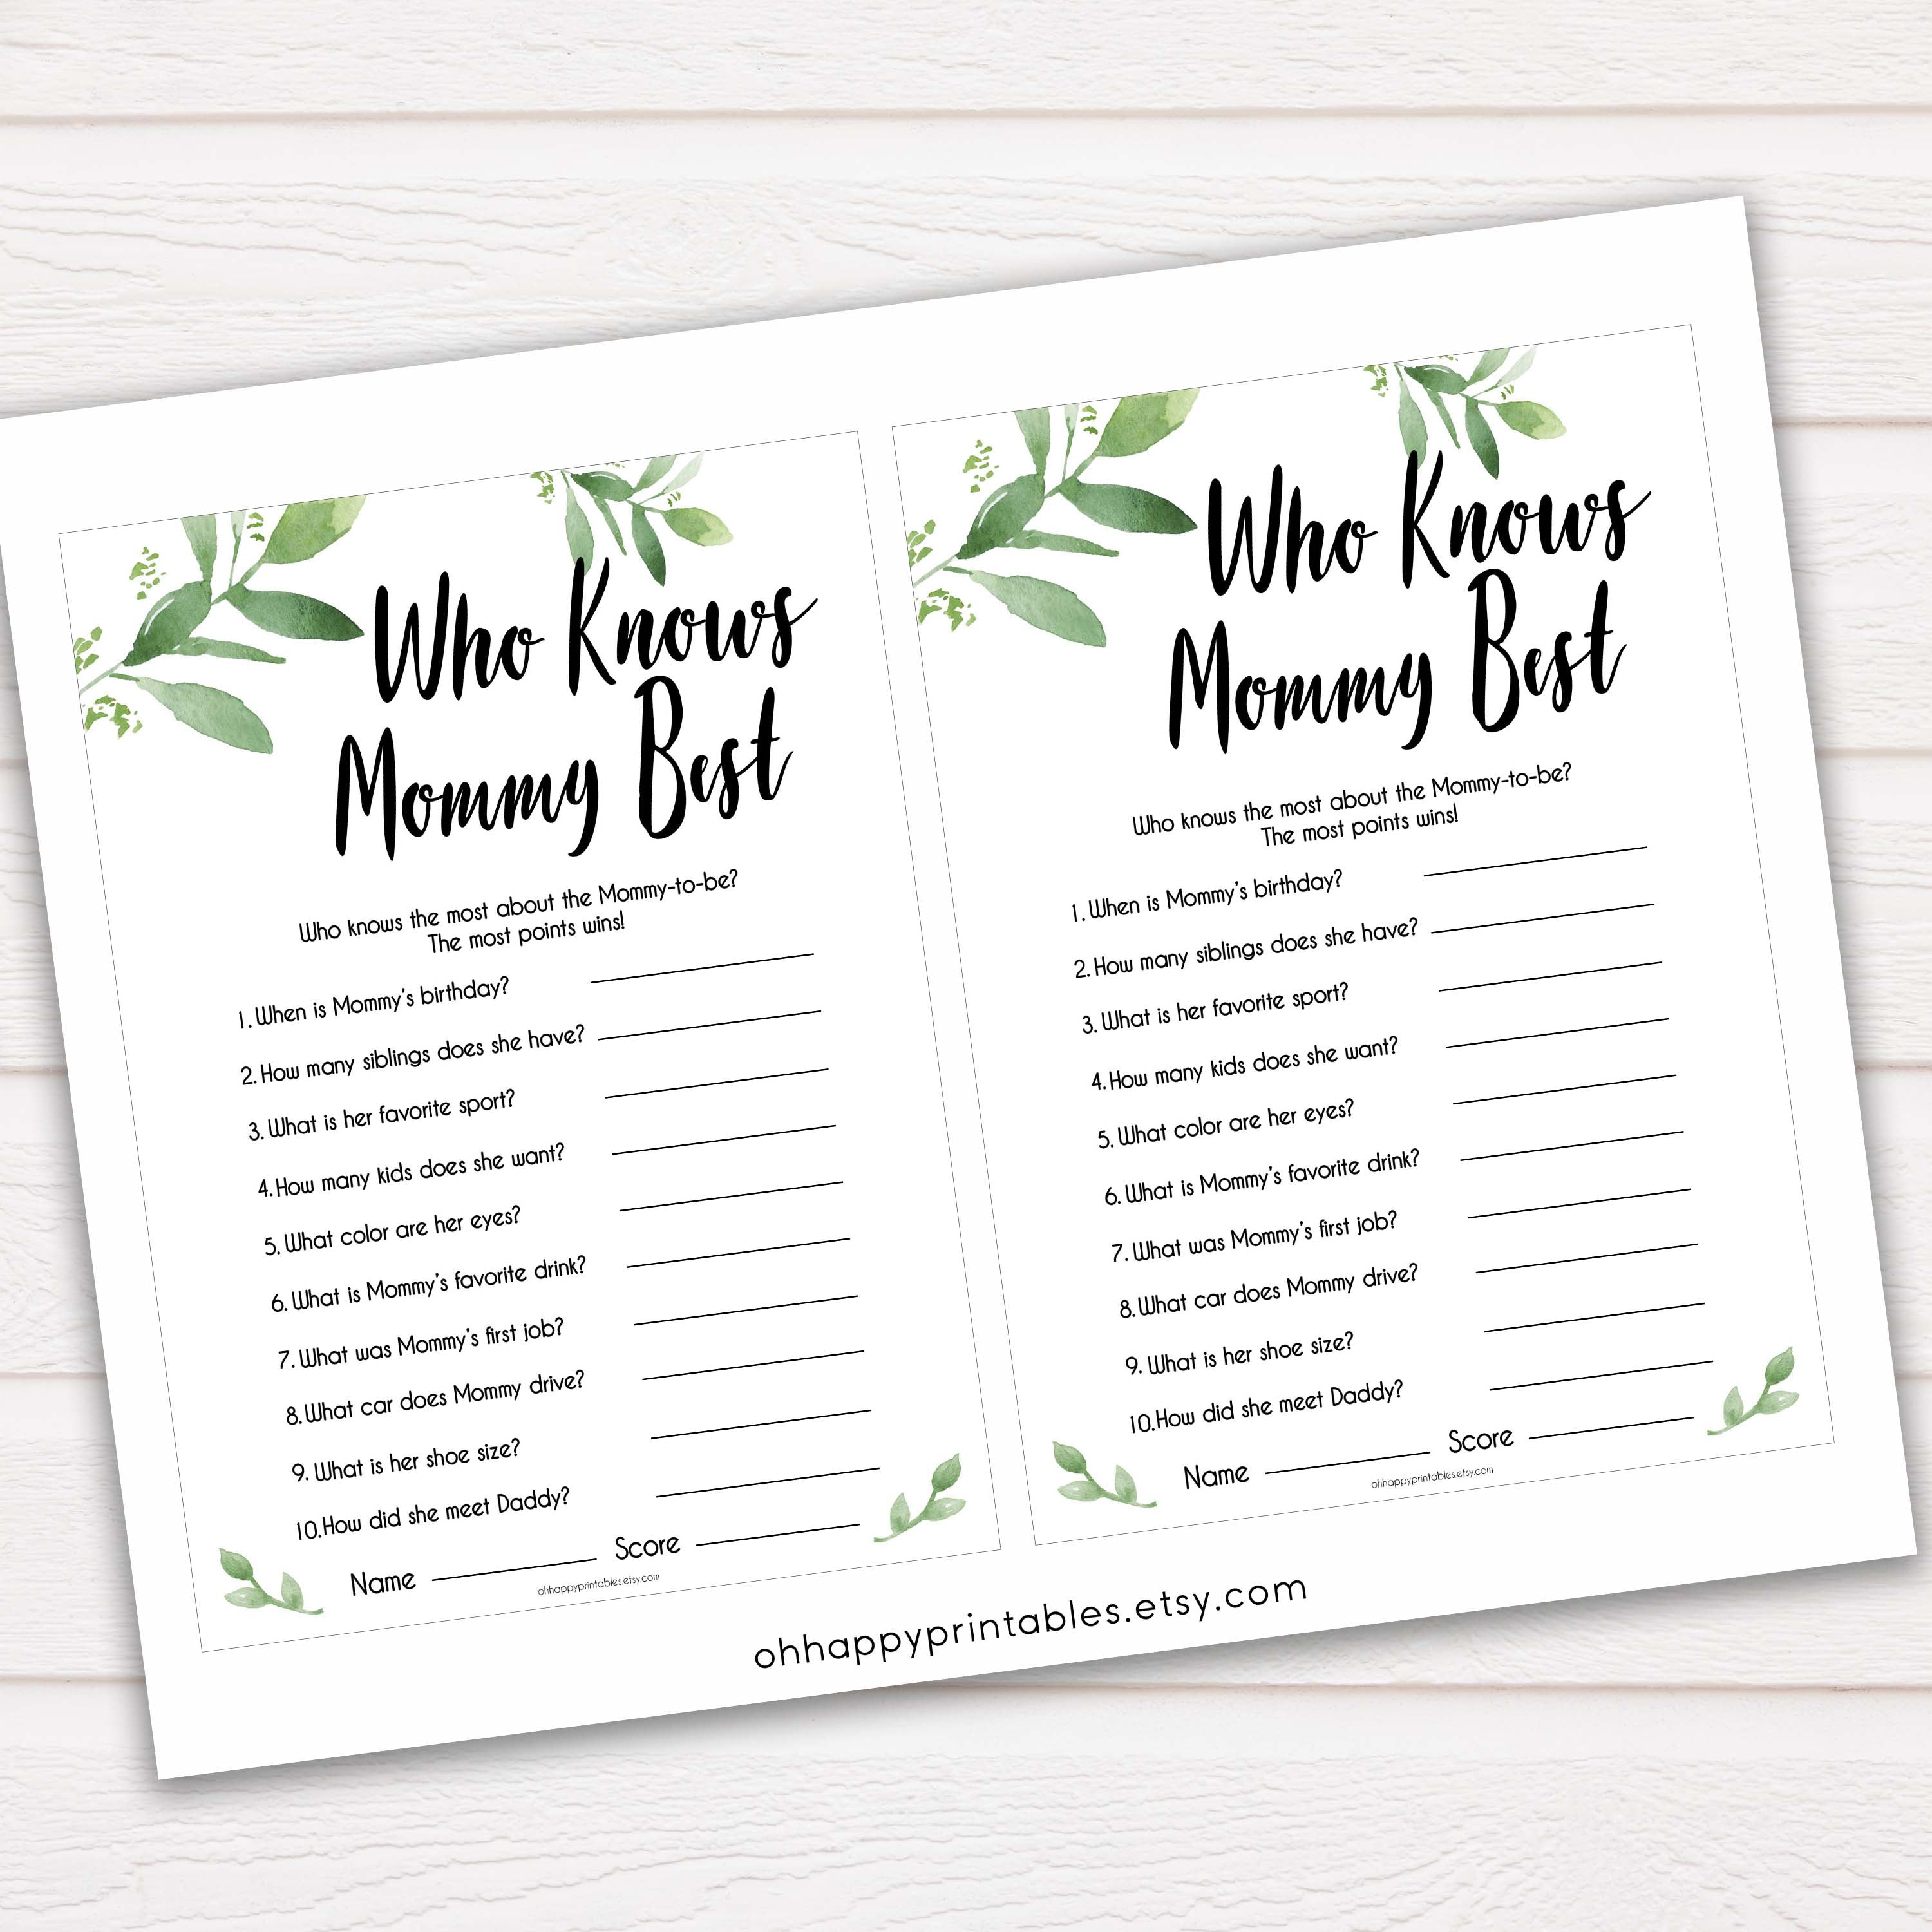 Botanical Who Knows Mommy Best Quiz, Baby Shower Games, Knows Mummy Games, Greenery Baby Shower Games, Green Fun Baby Shower Games